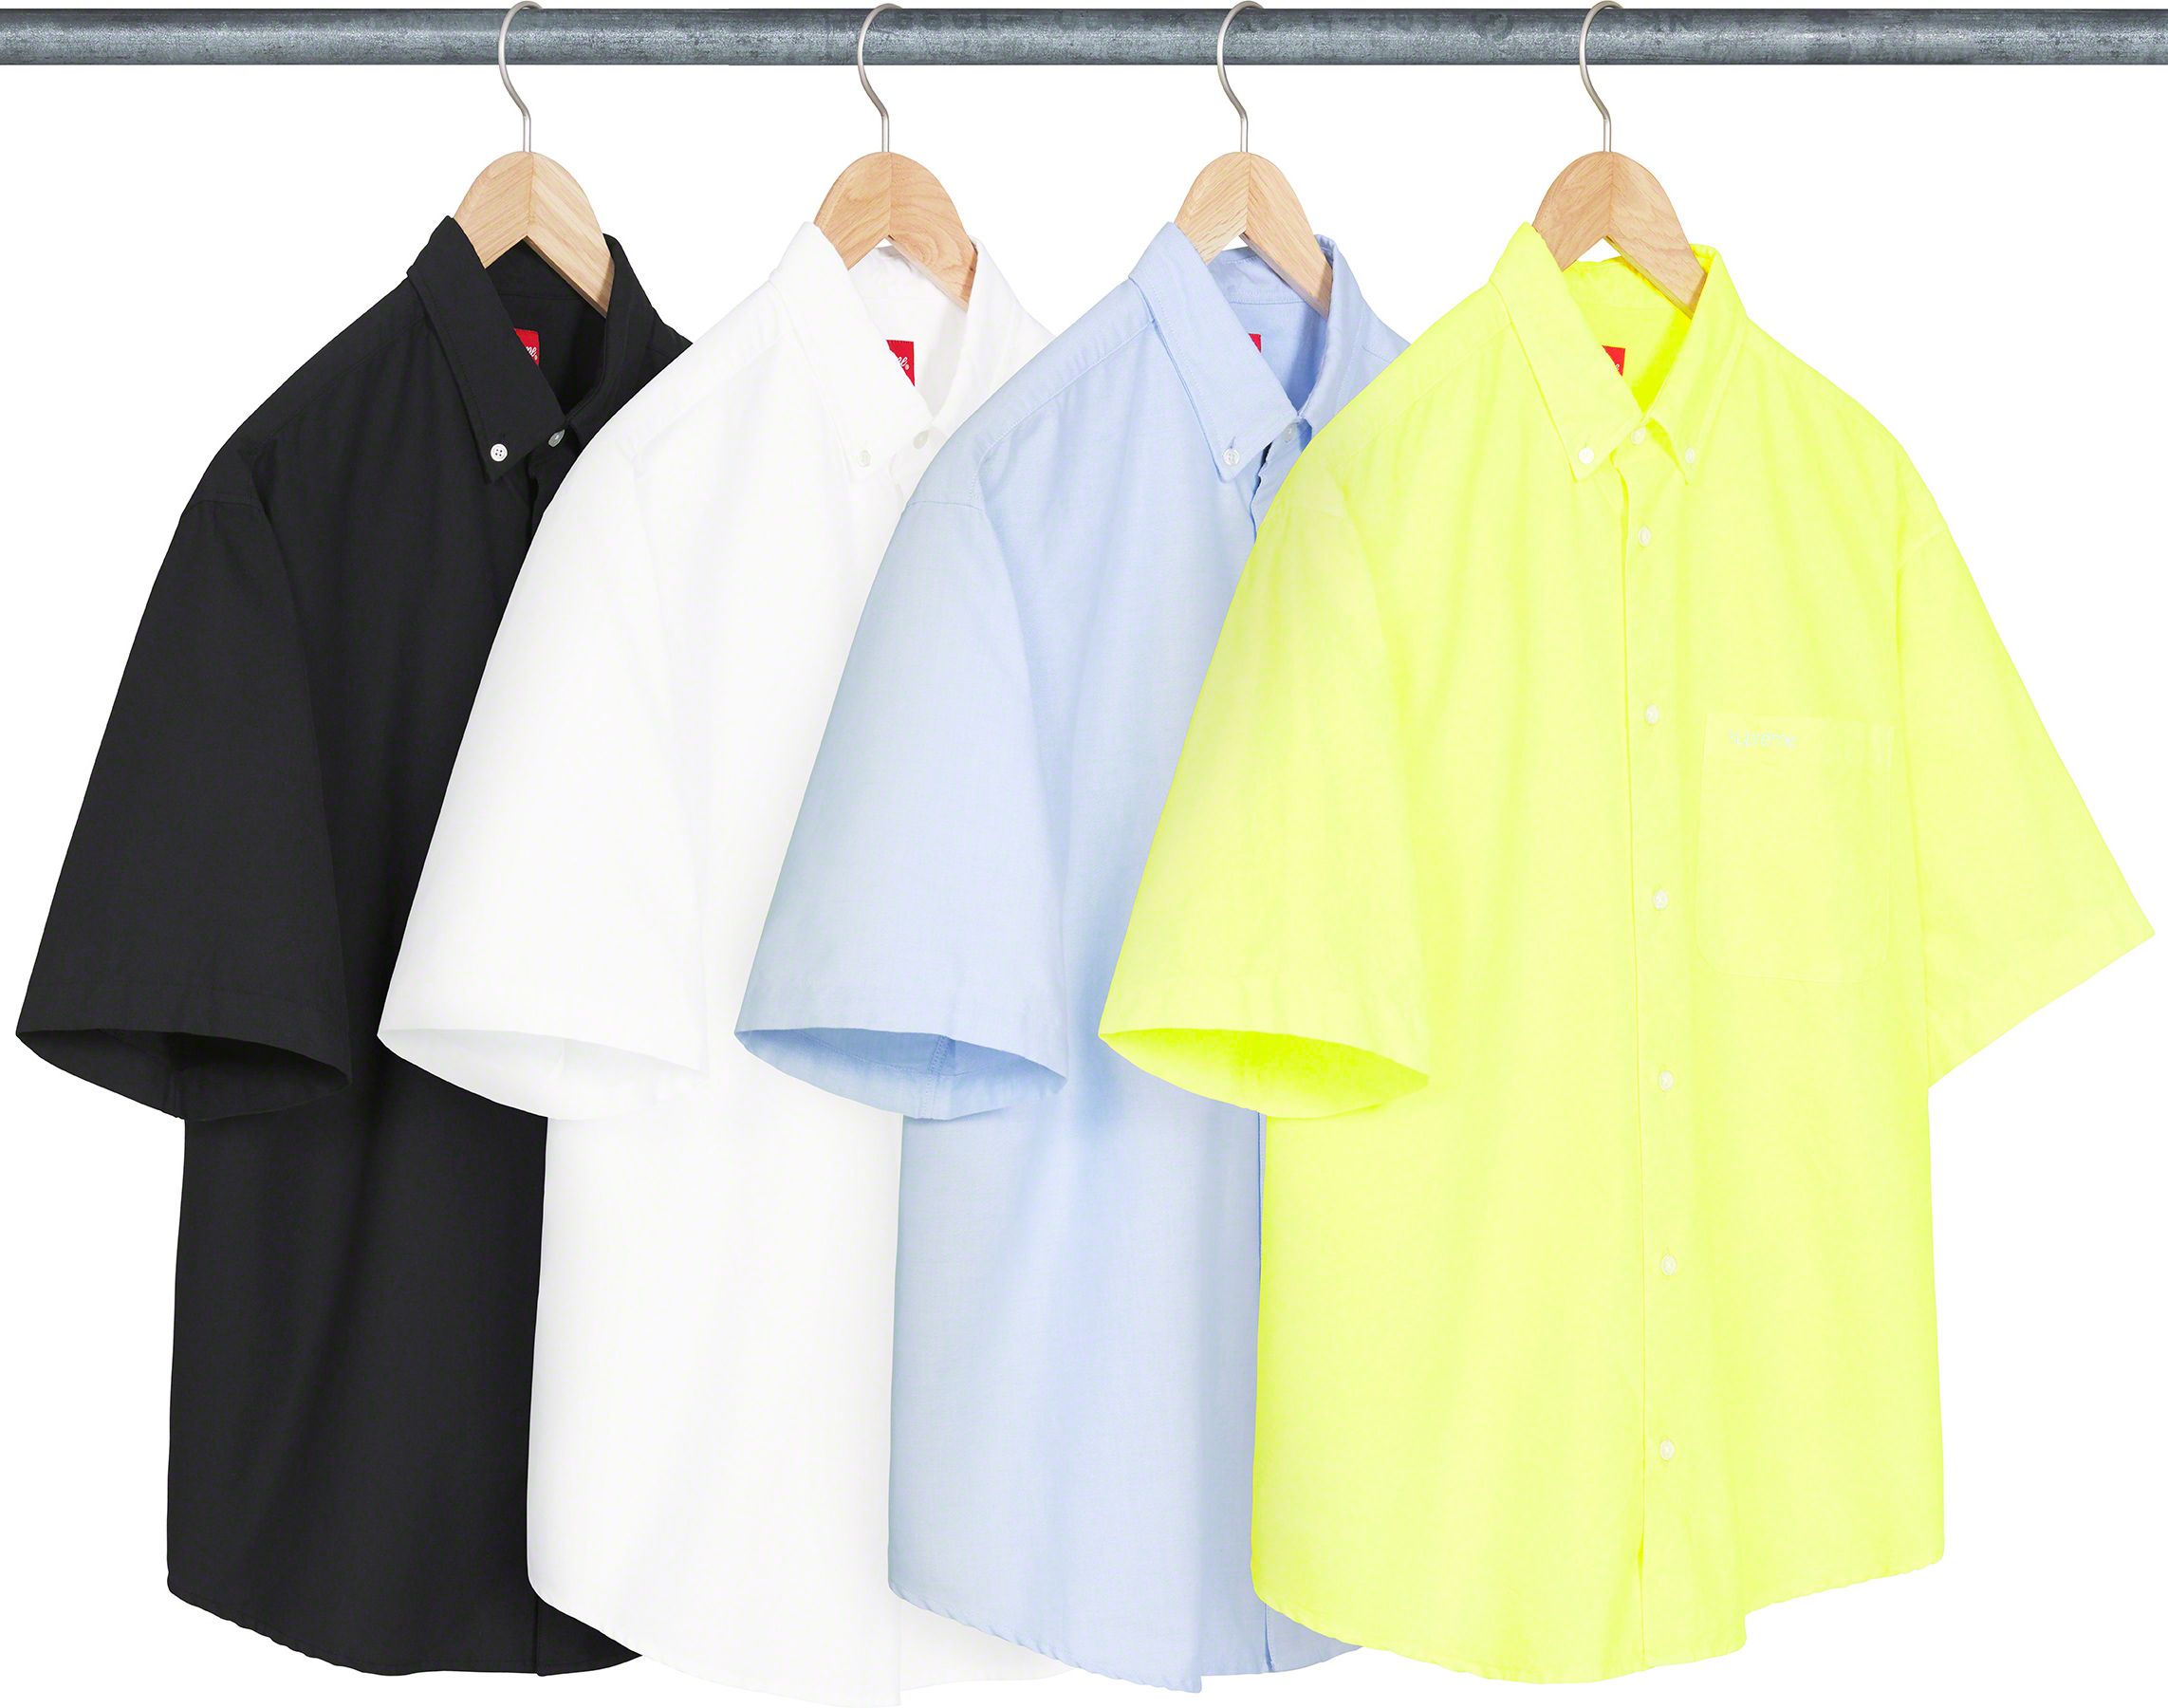 Supreme loose fit s s oxford shirt M 【翌日発送可能】 - スケートボード